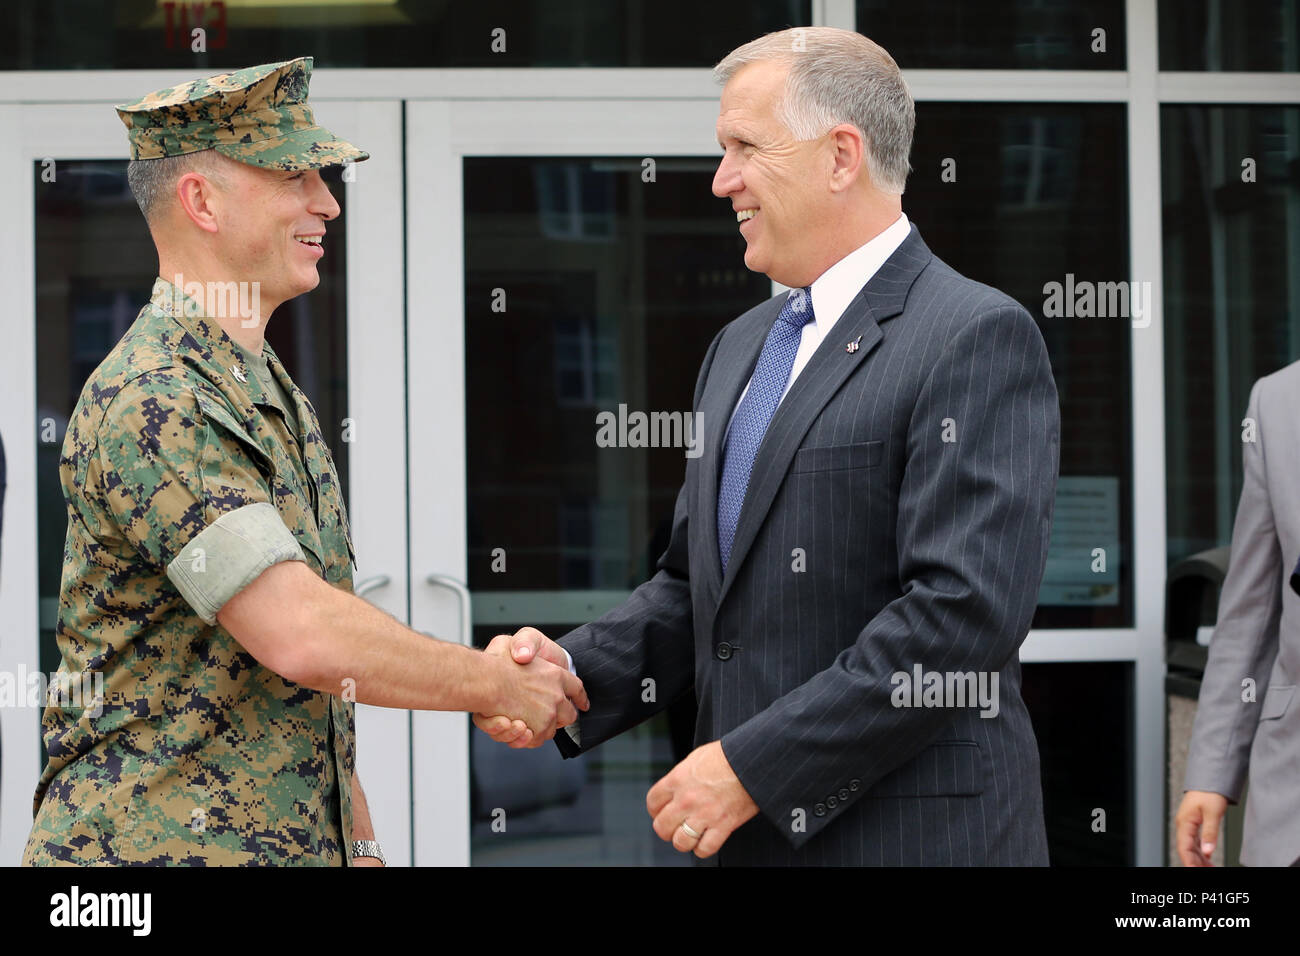 Col. Chris Pappas III, left, shakes hands with Sen. Thom Tillis at the mess hall during a visit at Marine Corps Air Station Cherry Point, N.C., June 1, 2016. Tillis visited the air station to address the needs and priorities of the base, and assess the Marine Corps’ presence in North Carolina. Tillis also toured Fleet Readiness Center East. Pappas is the commanding officer of MCAS Cherry Point, and Tillis is a North Carolina senator. (U.S. Marine Corps photo by Lance Cpl. Mackenzie Gibson/Released) Stock Photo